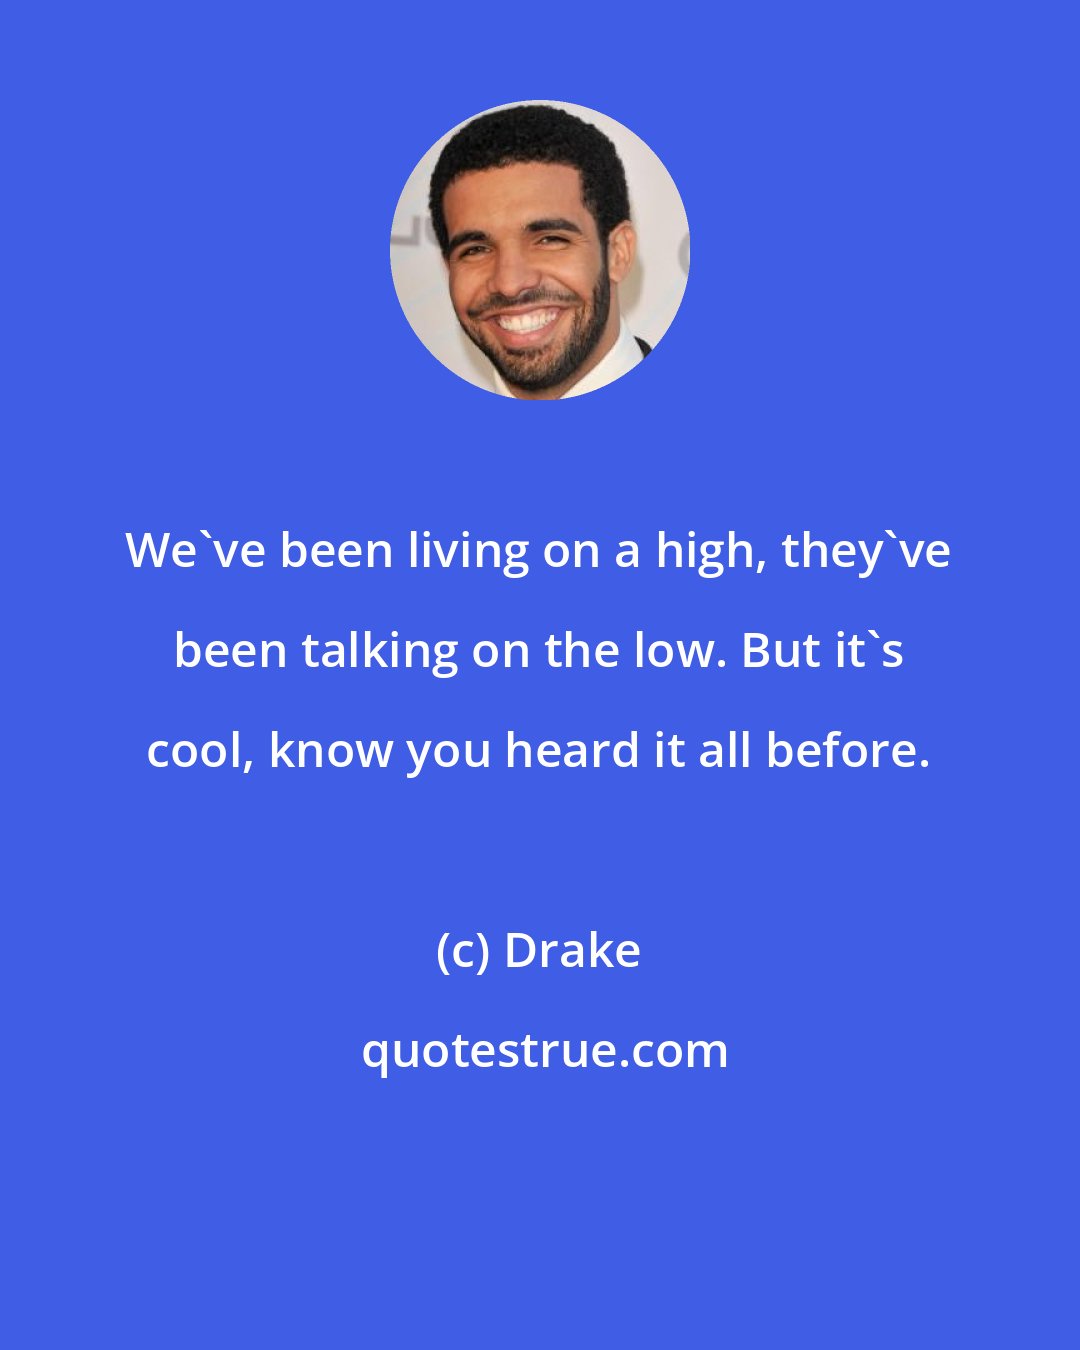 Drake: We've been living on a high, they've been talking on the low. But it's cool, know you heard it all before.